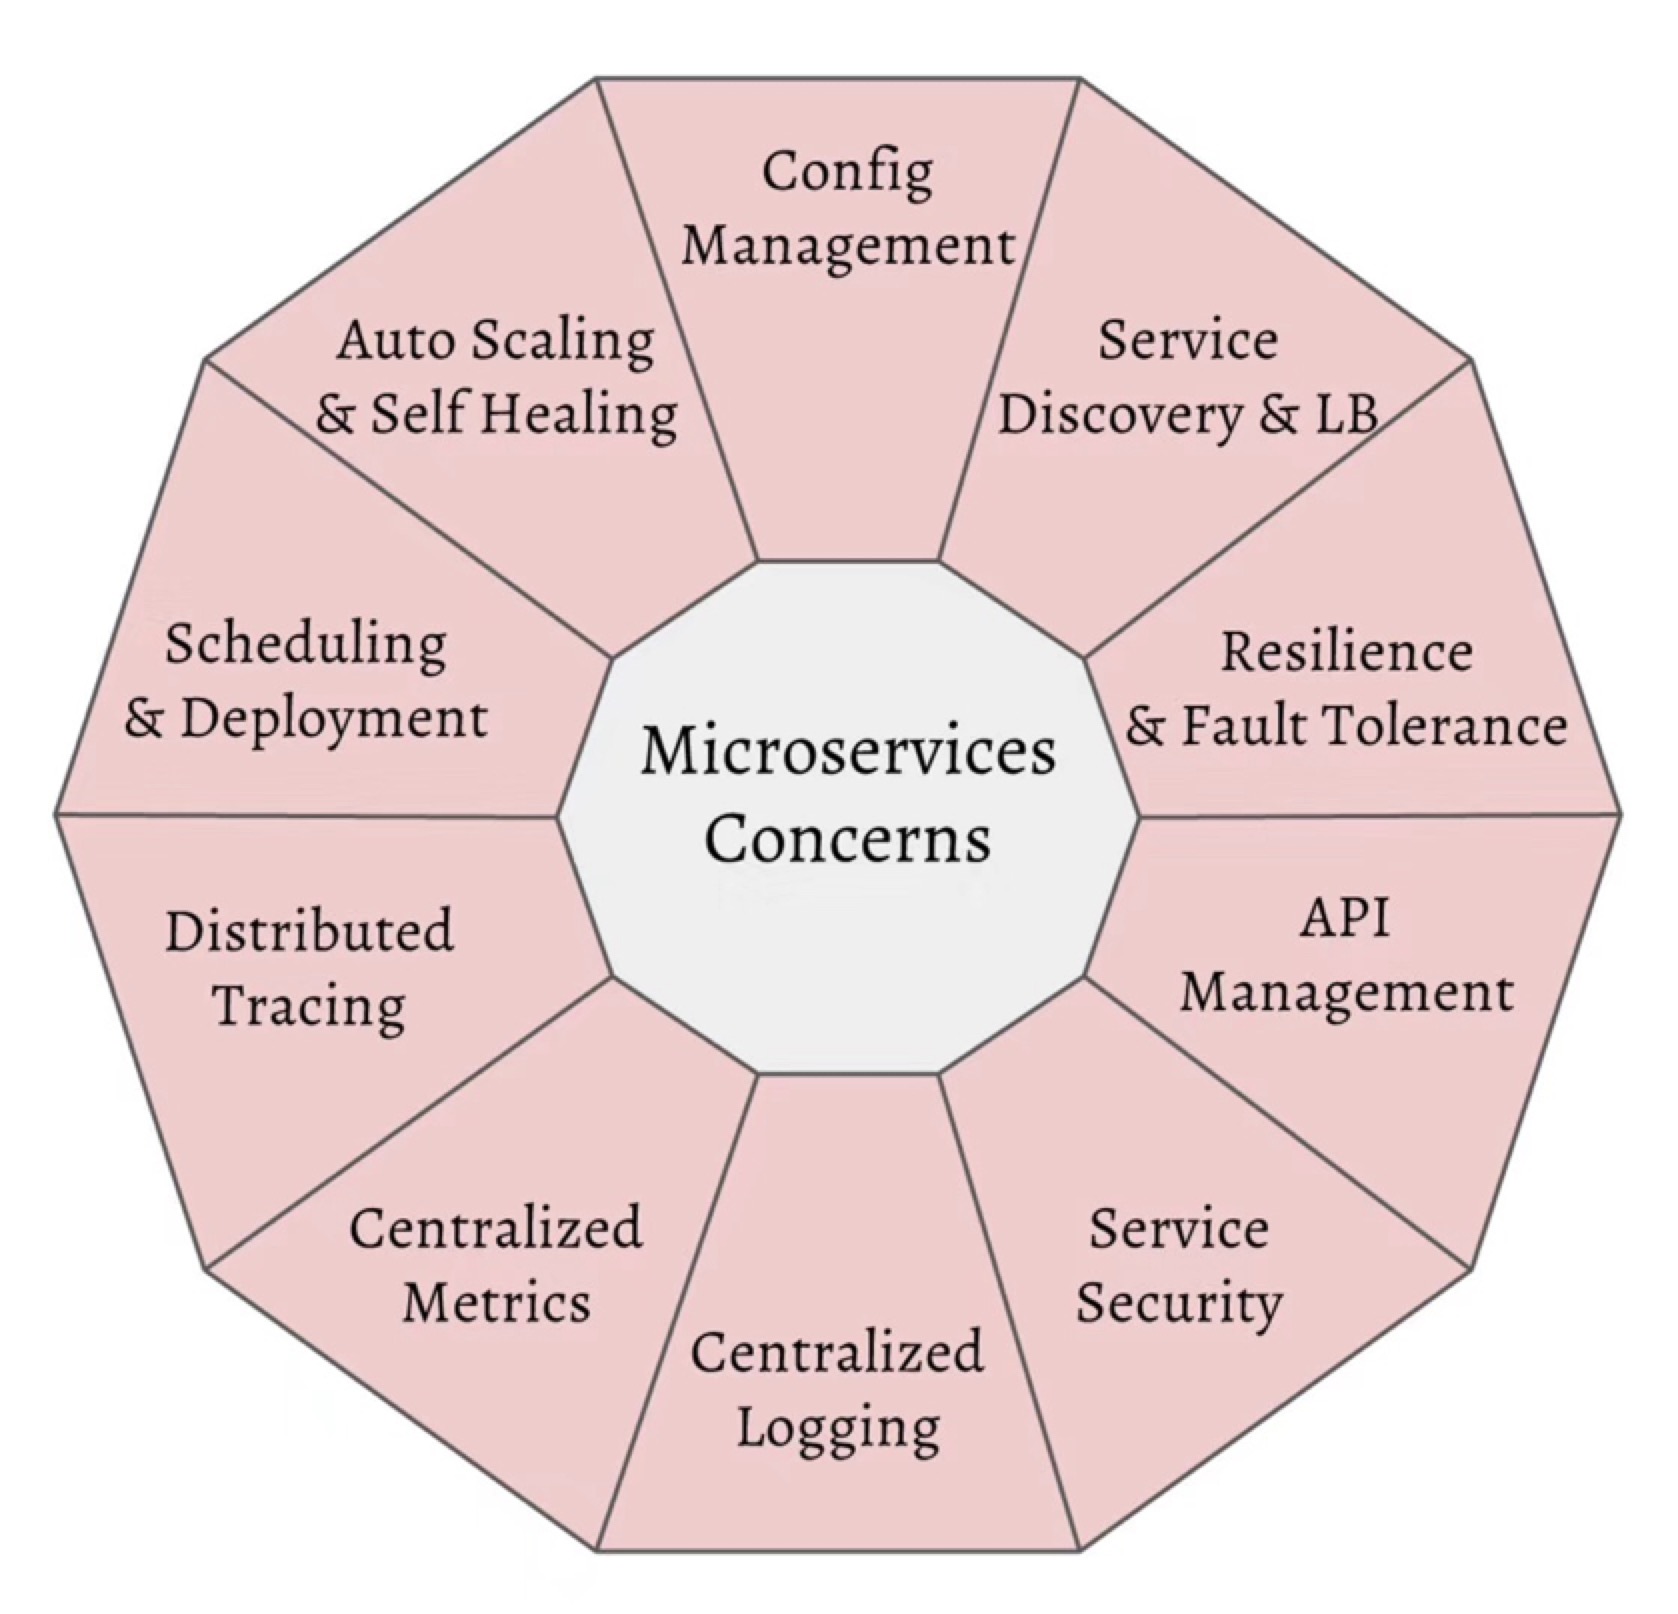 https://img.zhaoweiguo.com/knowledge/images/architectures/microservices/microservices-concerns.jpg